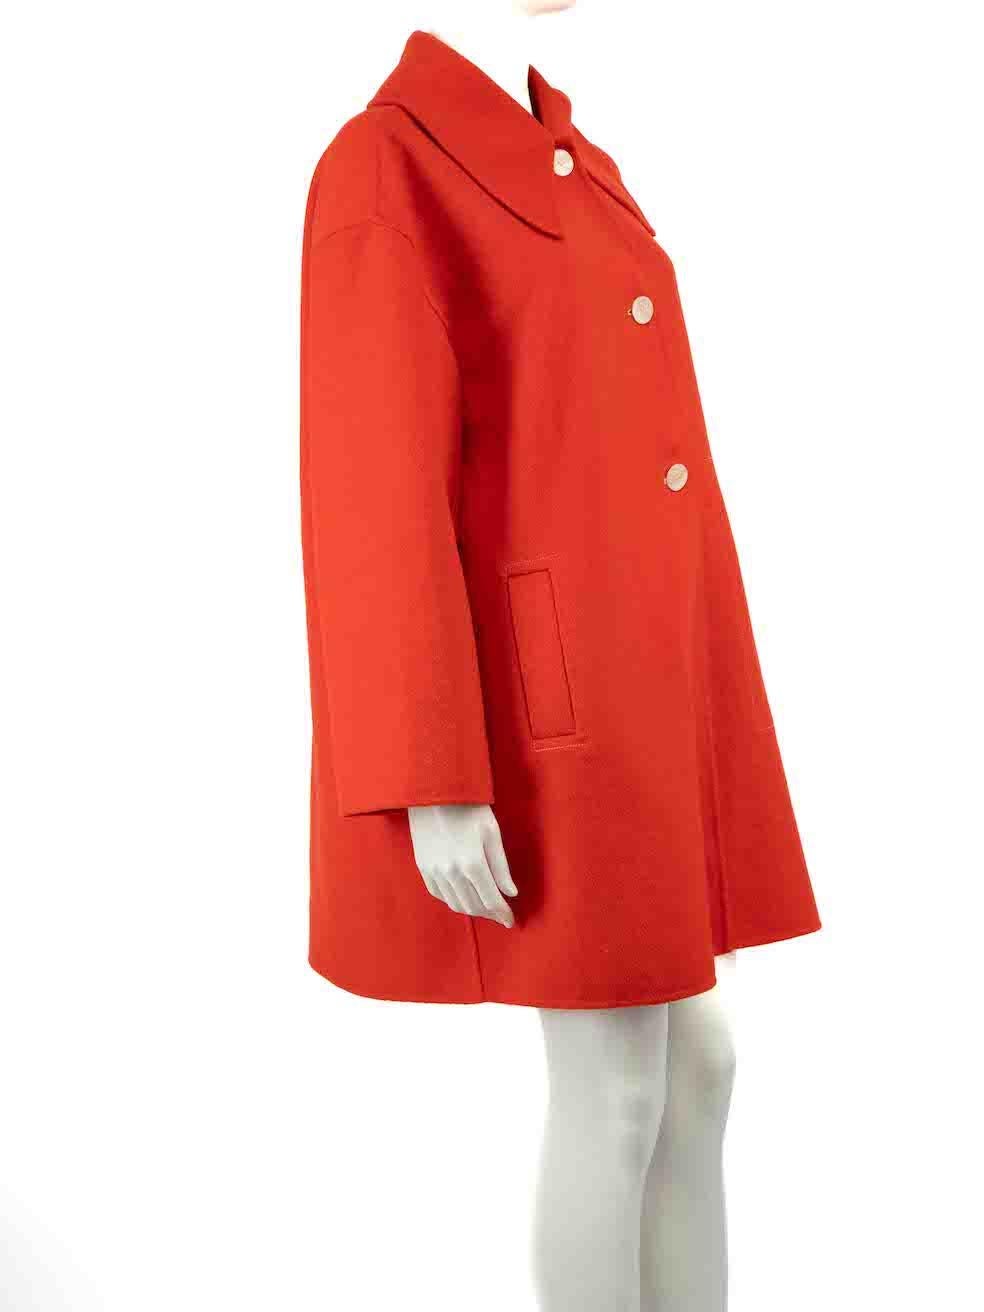 CONDITION is Very good. Minimal wear to coat is evident. Minimal wear to inside neck with slight discolouration on this used Ganni designer resale item.
 
 
 
 Details
 
 
 Red
 
 Wool
 
 Coat
 
 Single breasted
 
 Button up fastening
 
 2x Front